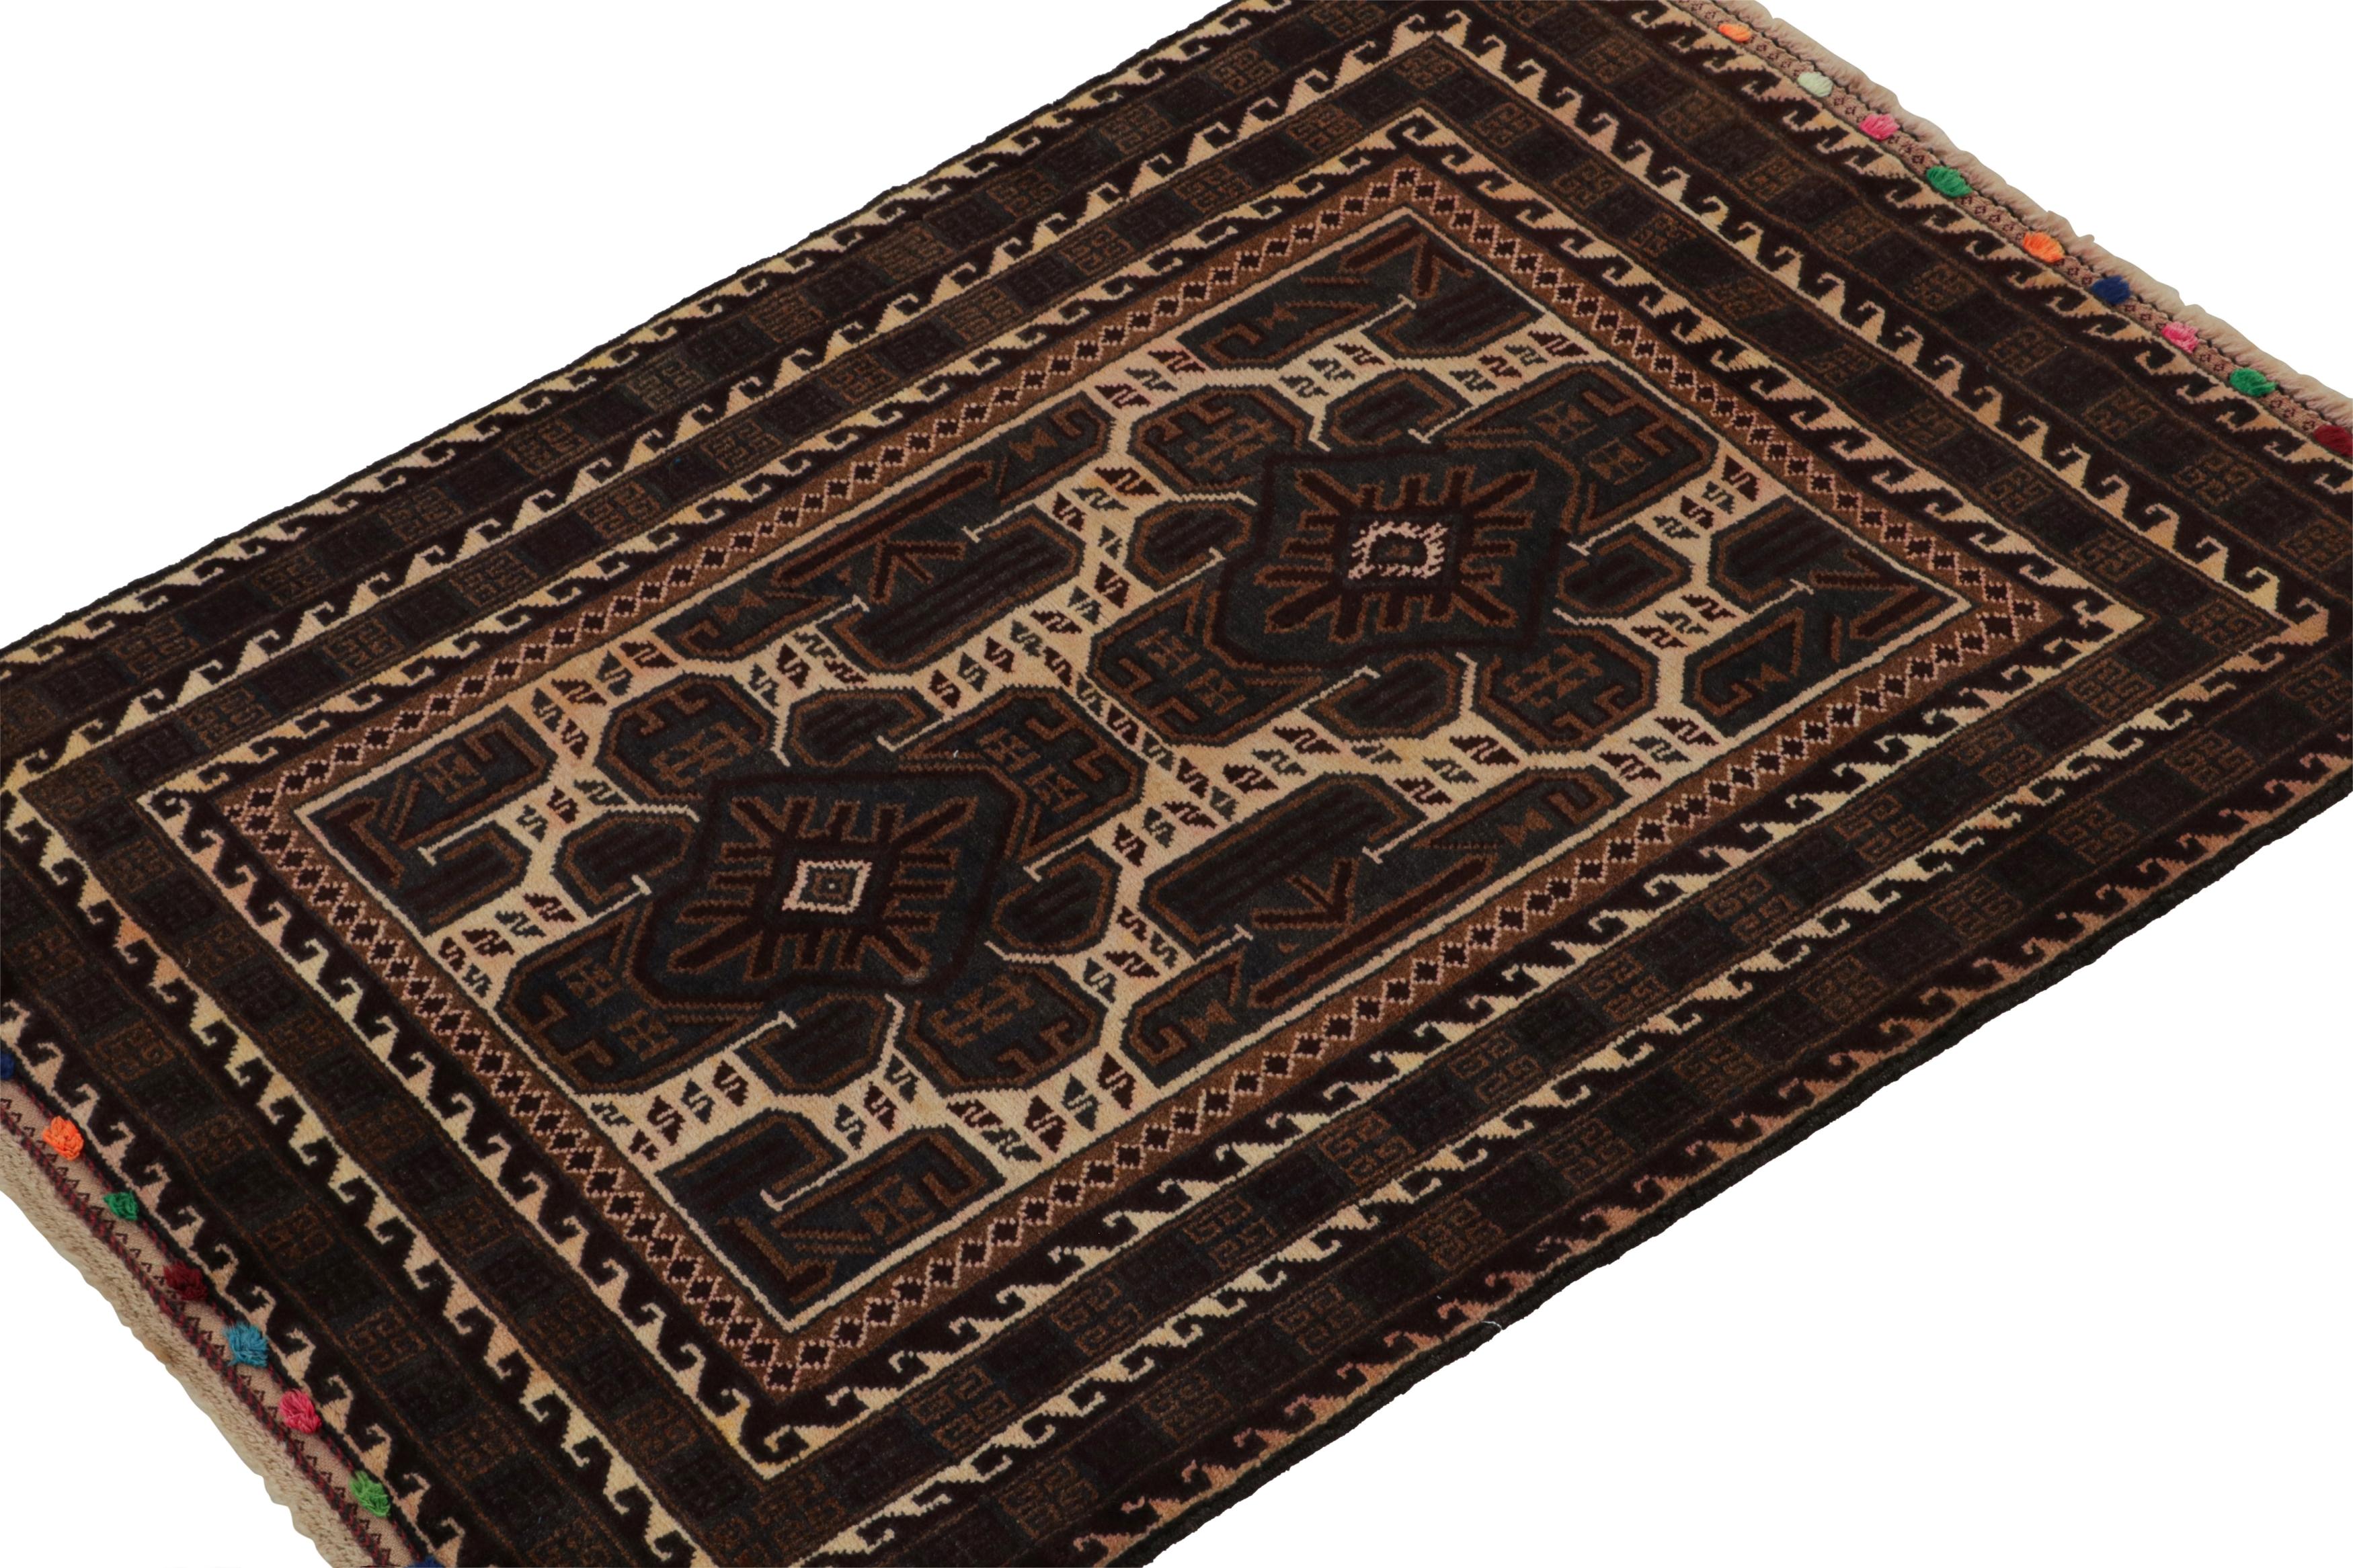 Hand-knotted in wool, this 3x4 Baluch Persian rug of the 1950s is the latest to enter Rug & Kilim’s Antique & Vintage collection.

On the Design:

The piece carries a deep sense of mystery that the traditional tribal pieces are known to embody. This